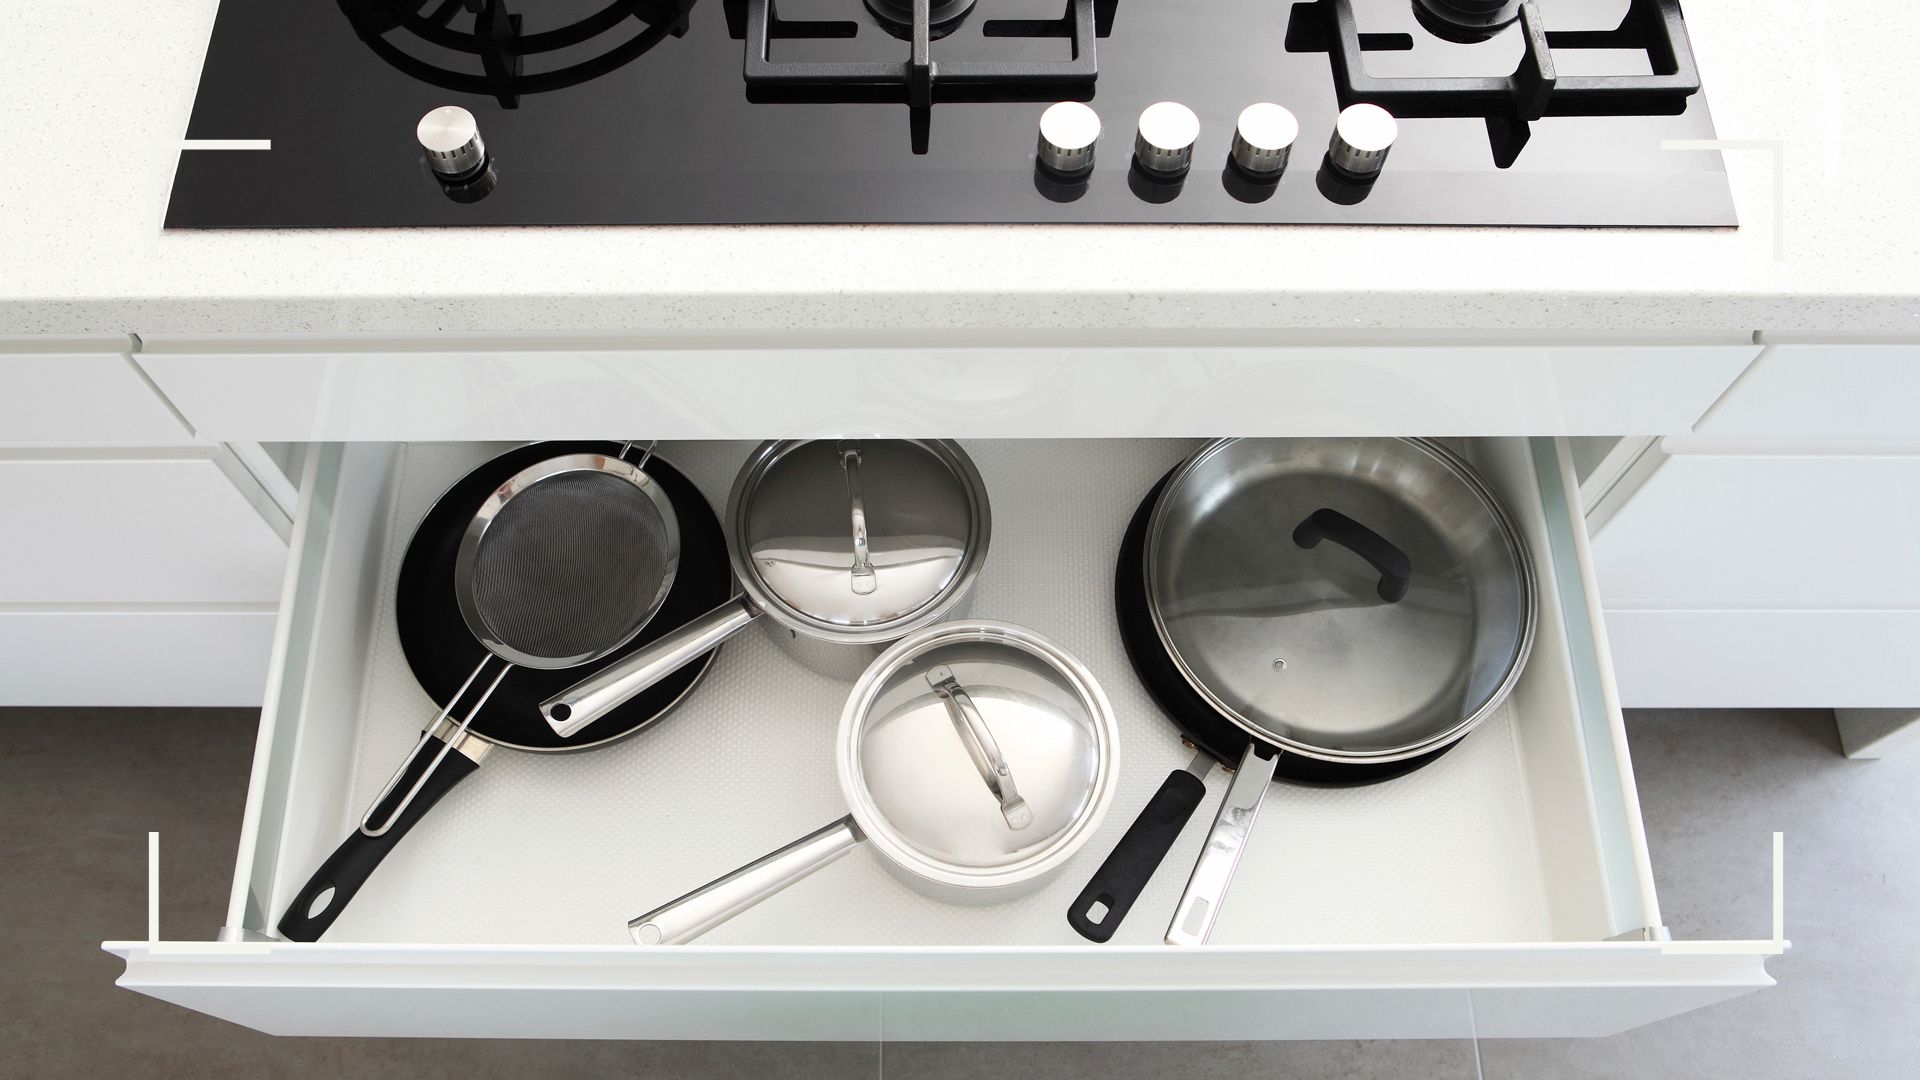 8 Pots & Pans Storage Ideas for Small Kitchens